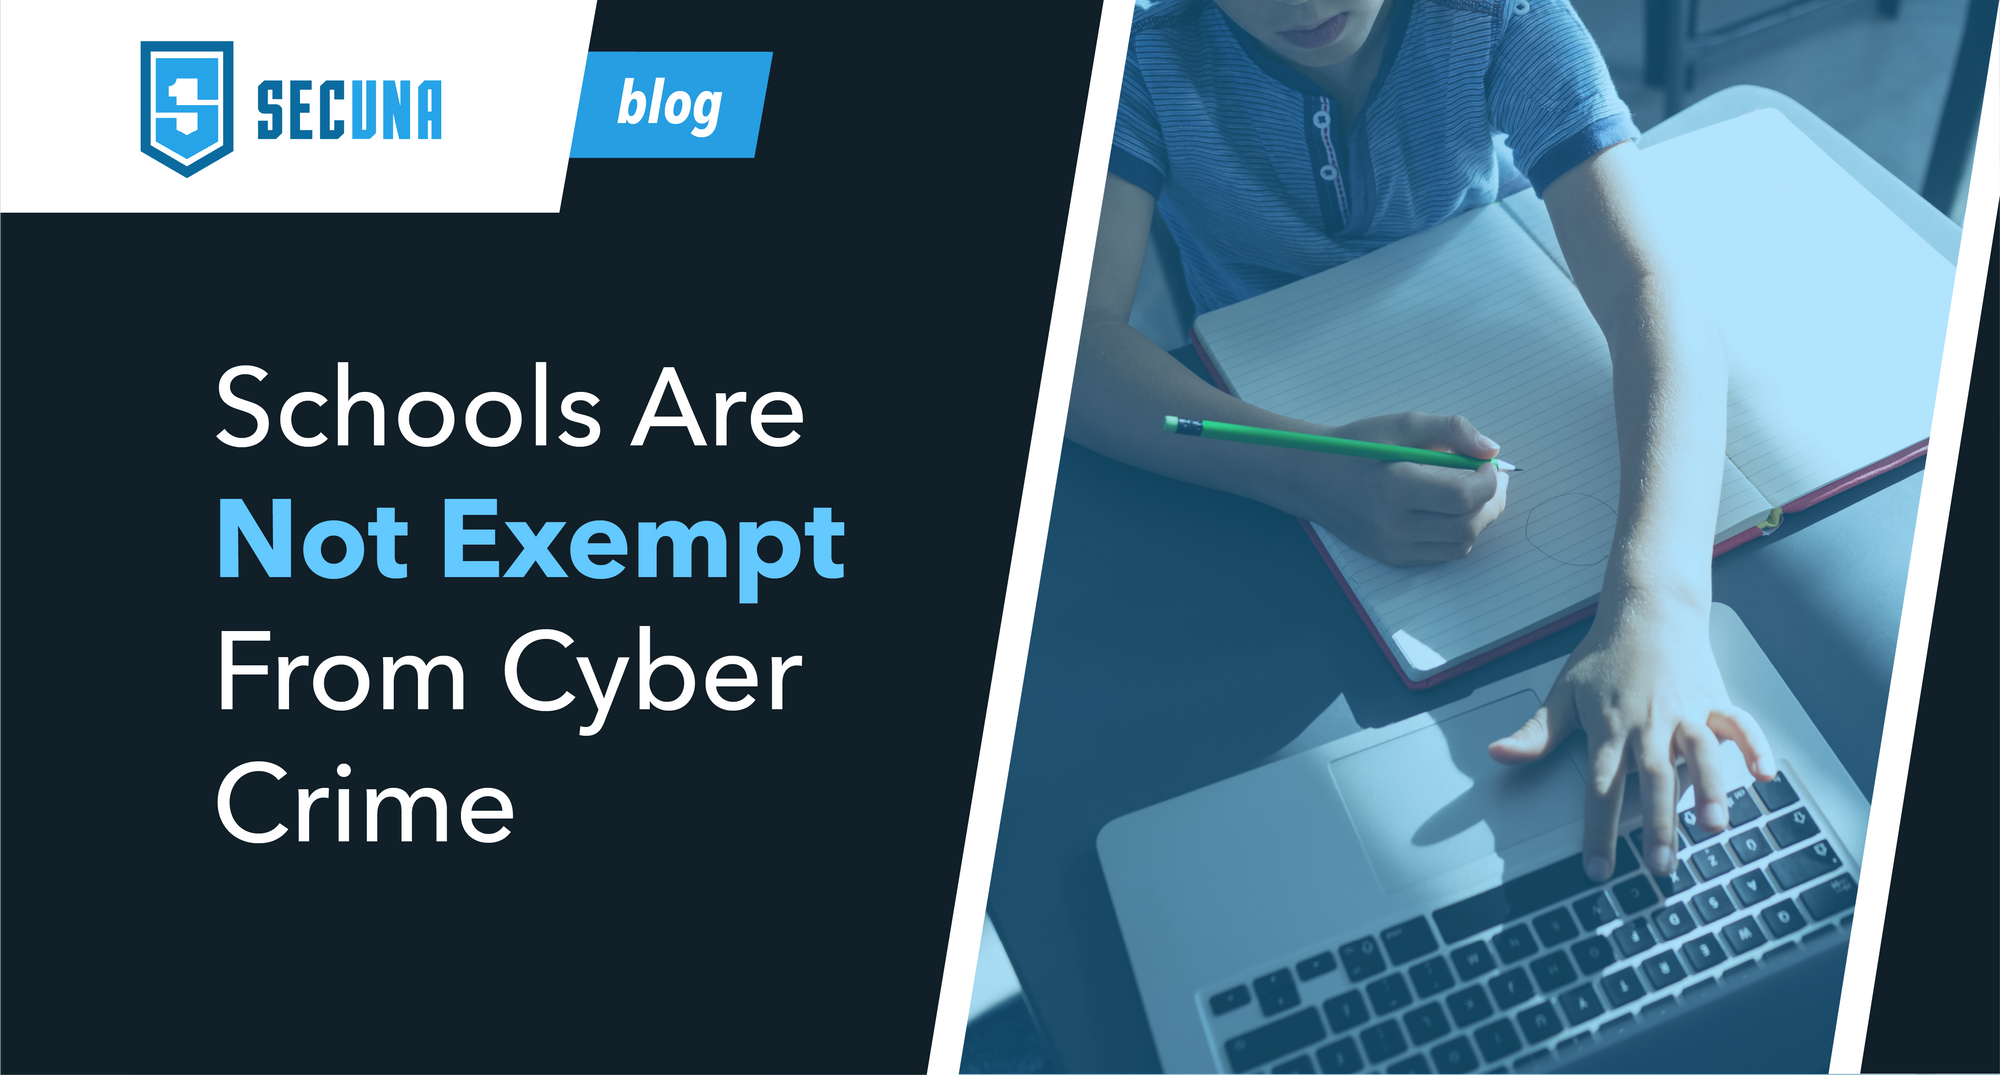 Schools Are Not Exempt from Cyber Crime: 5 Ways to Stay Secure